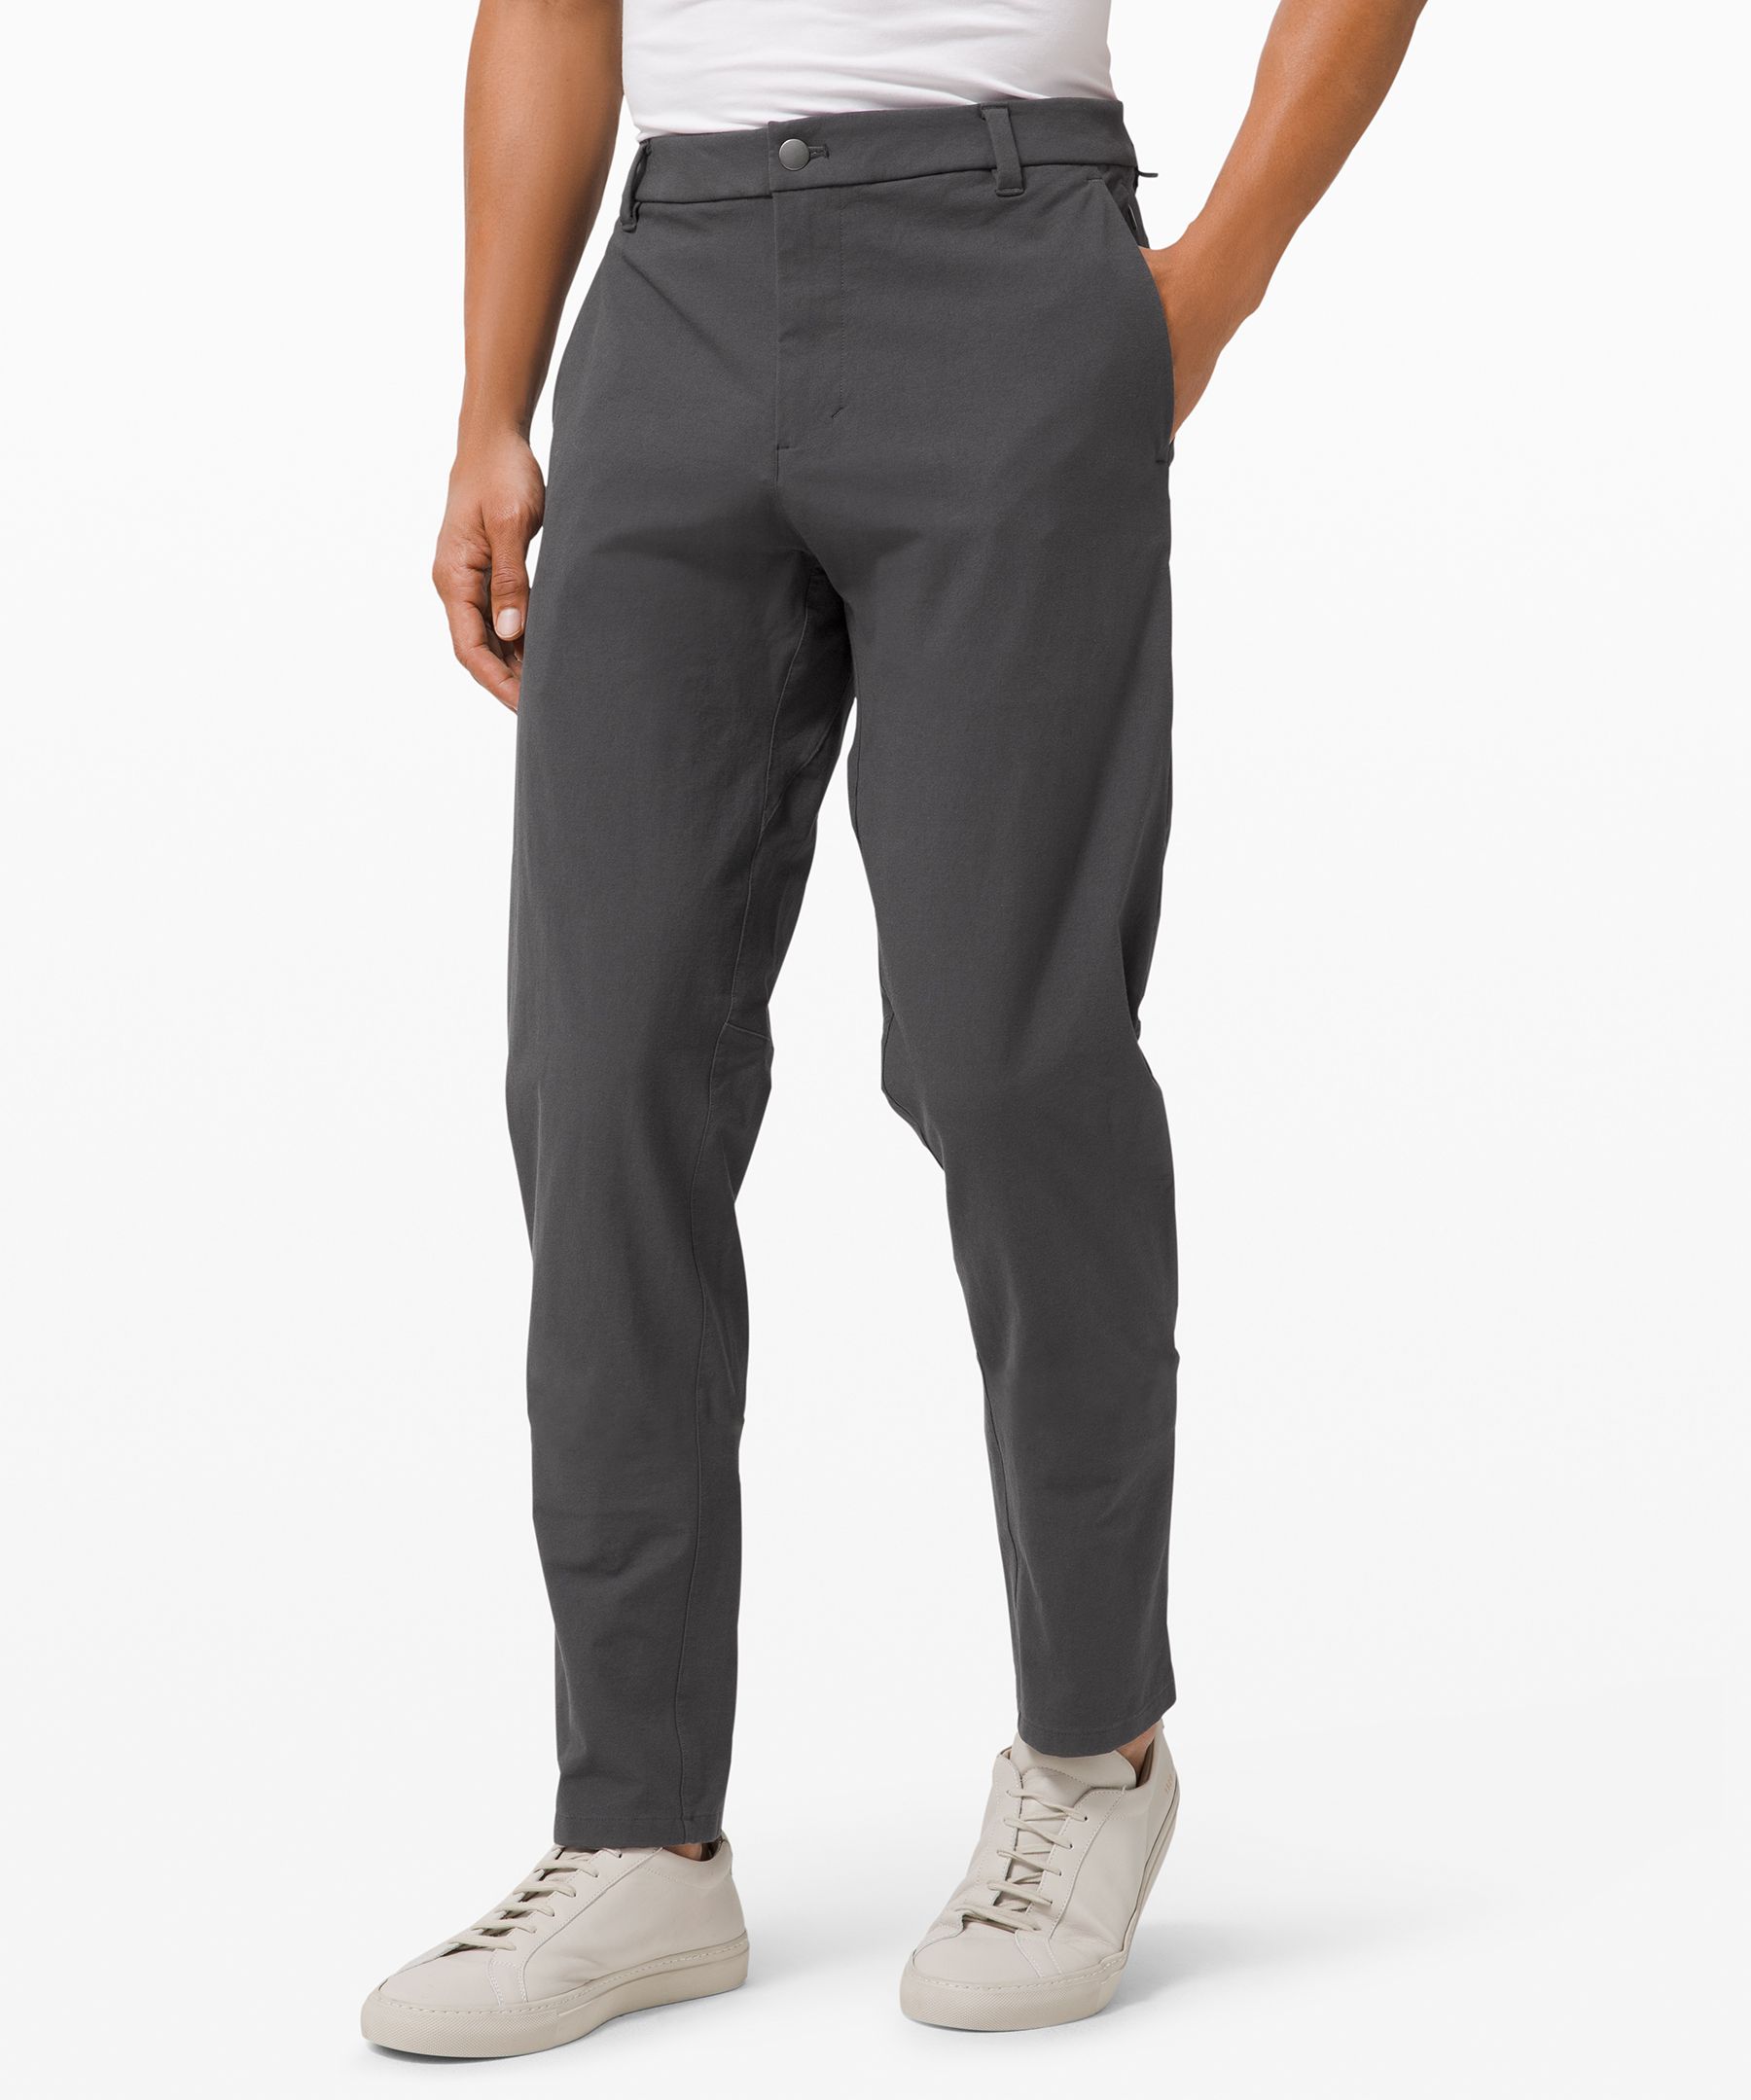 Lululemon Commission Pant Classic *canvas 34" In Graphite Grey